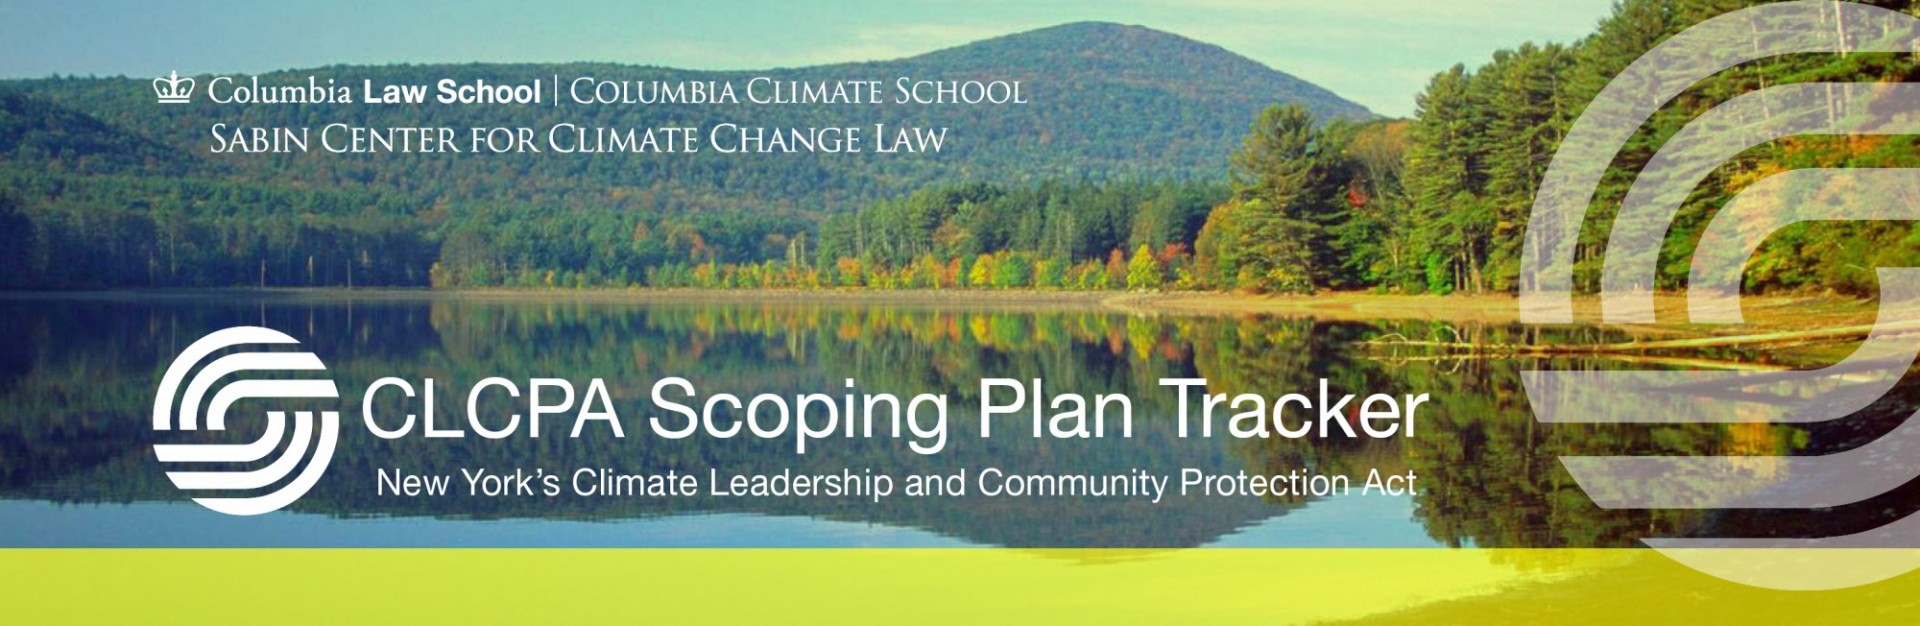 Banner image of a lake with forest and mountain in the background. Text reads "Columbia Law School, Columbia Climate School, Sabin Center for Climate Change Law, CLCPA Scoping Plan Tracker, New York's Climate Leadership and Community Protection Act"